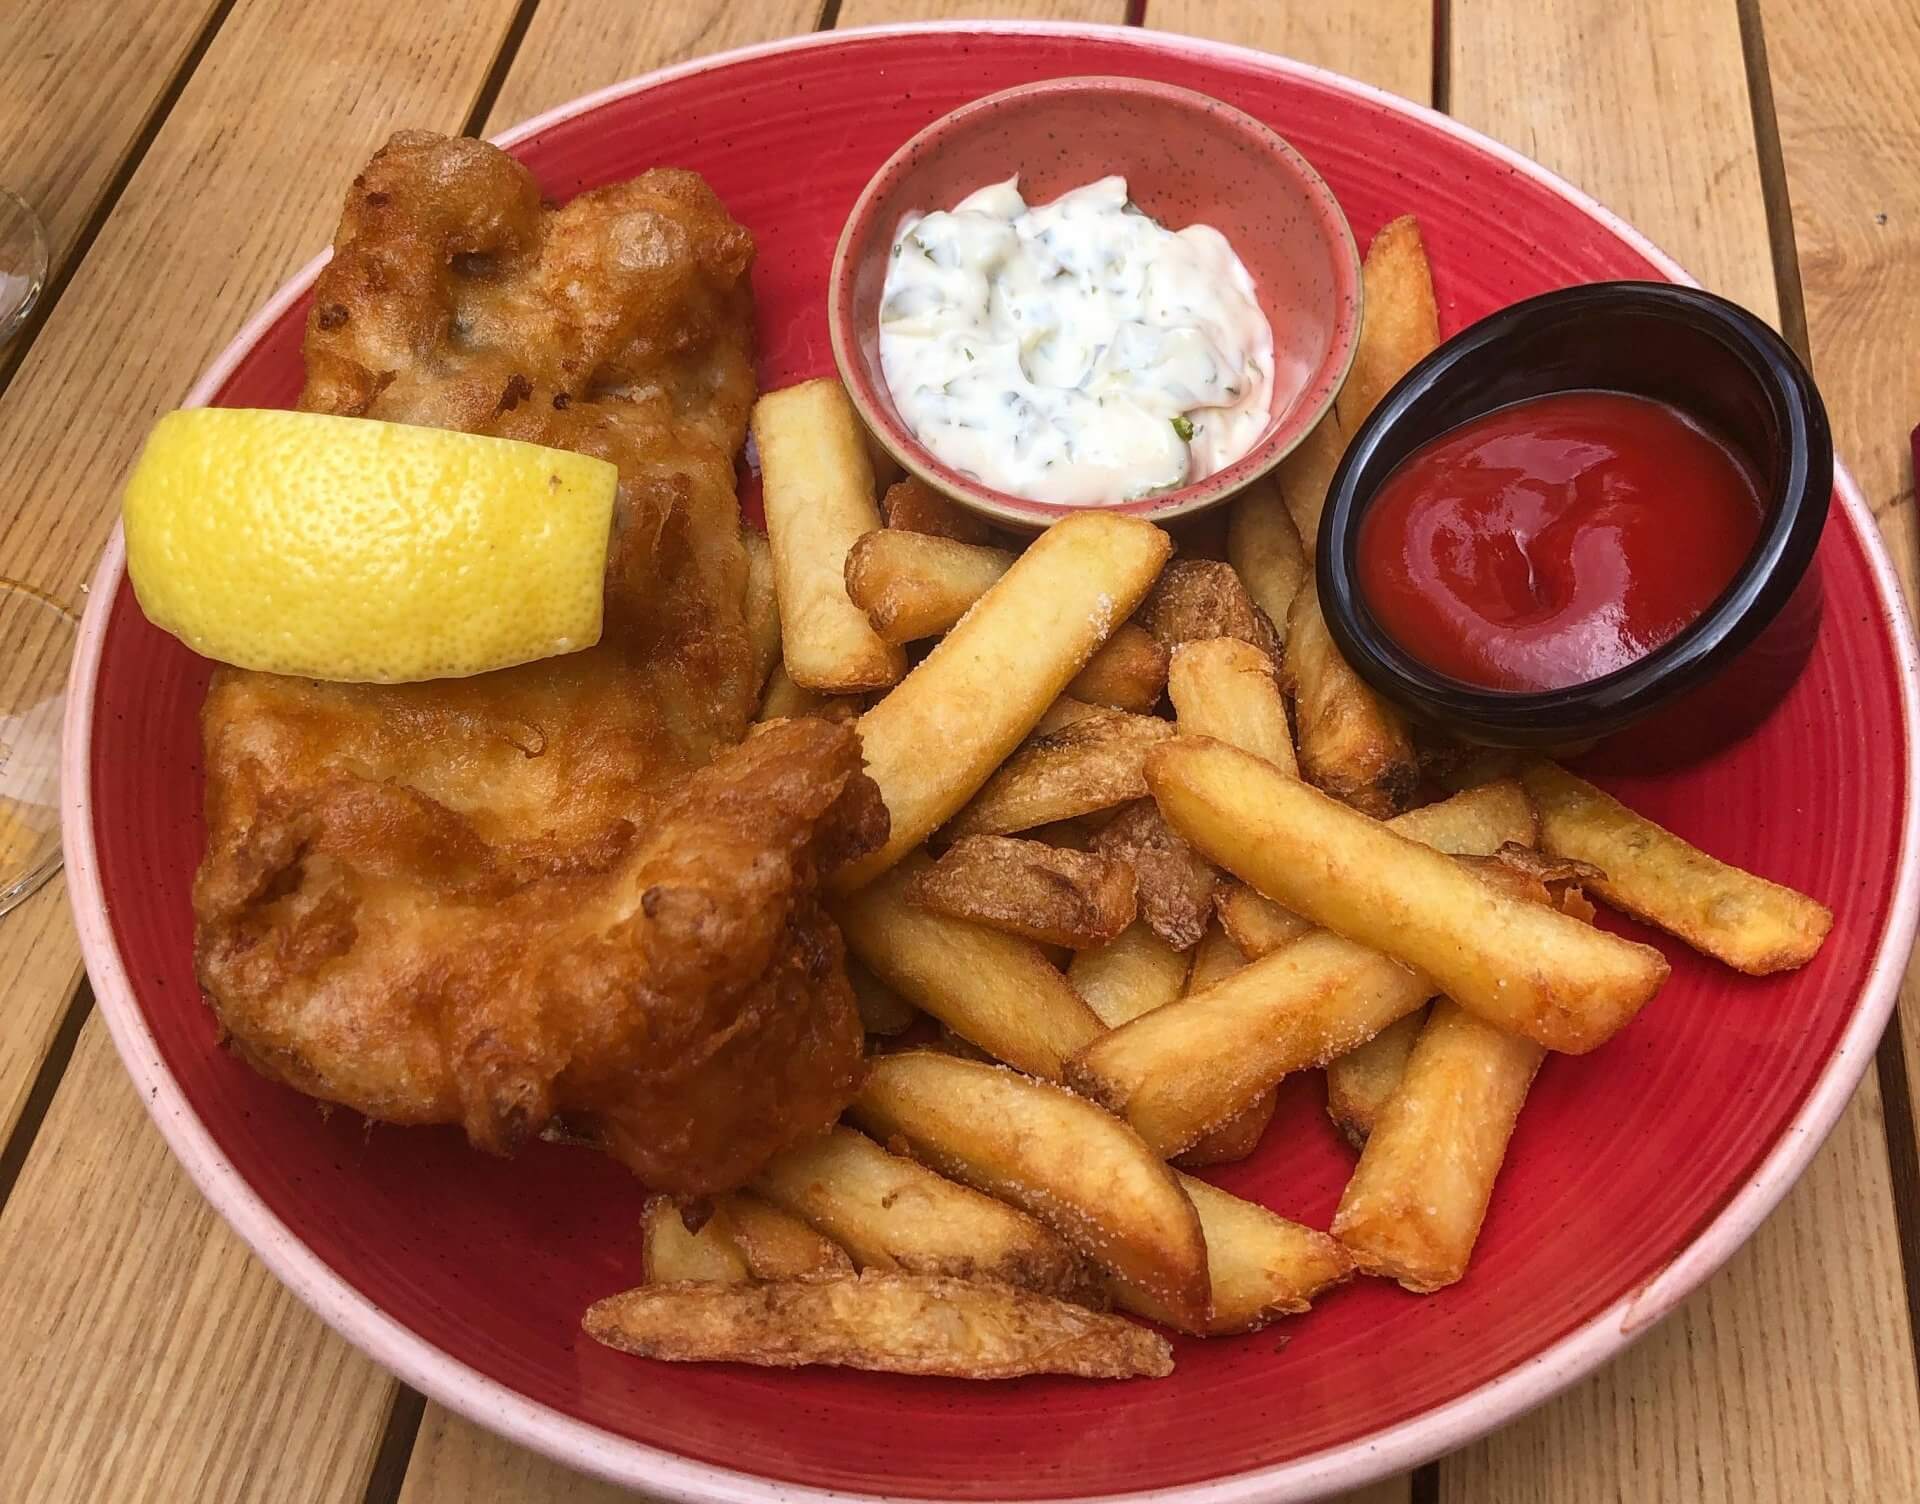 Fish and chips in ireland